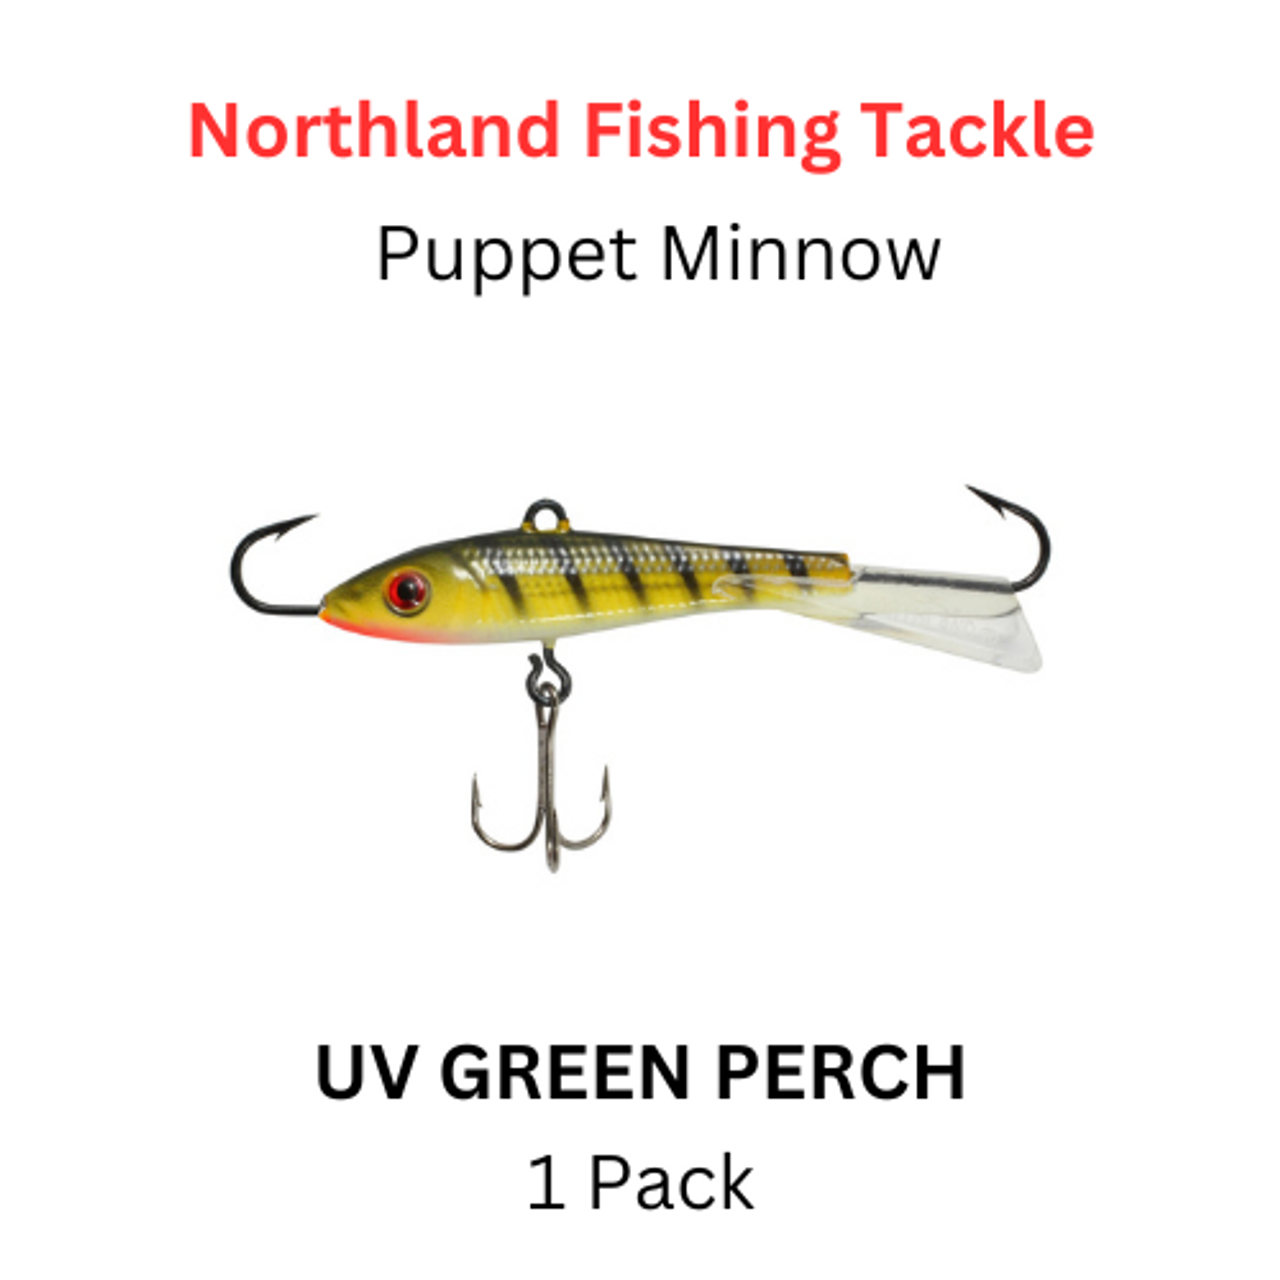 Northland Fishing Tackle: 1oz Puppet Minnow uv green perch